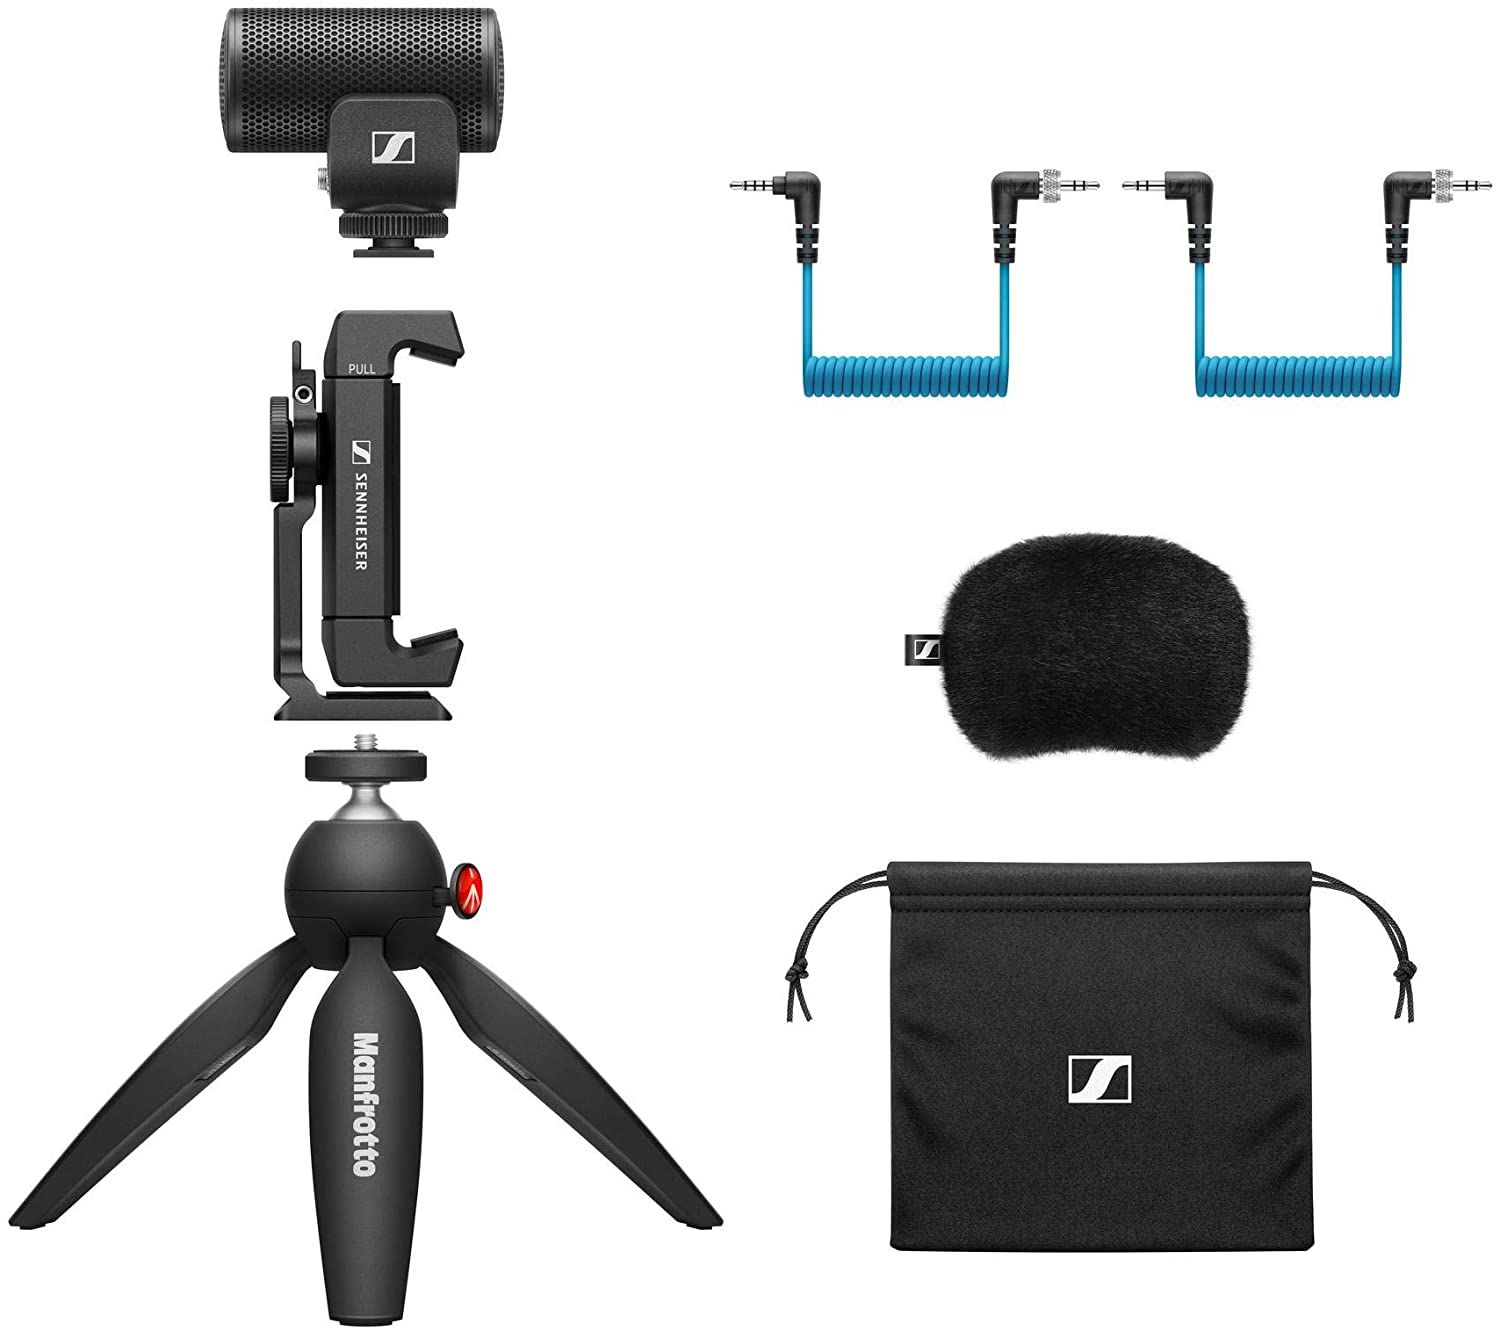 Sennheiser MKE 200 Mobile Kit Ultracompact Camera-Mount Directional Microphone with Smartphone Recording Bundle